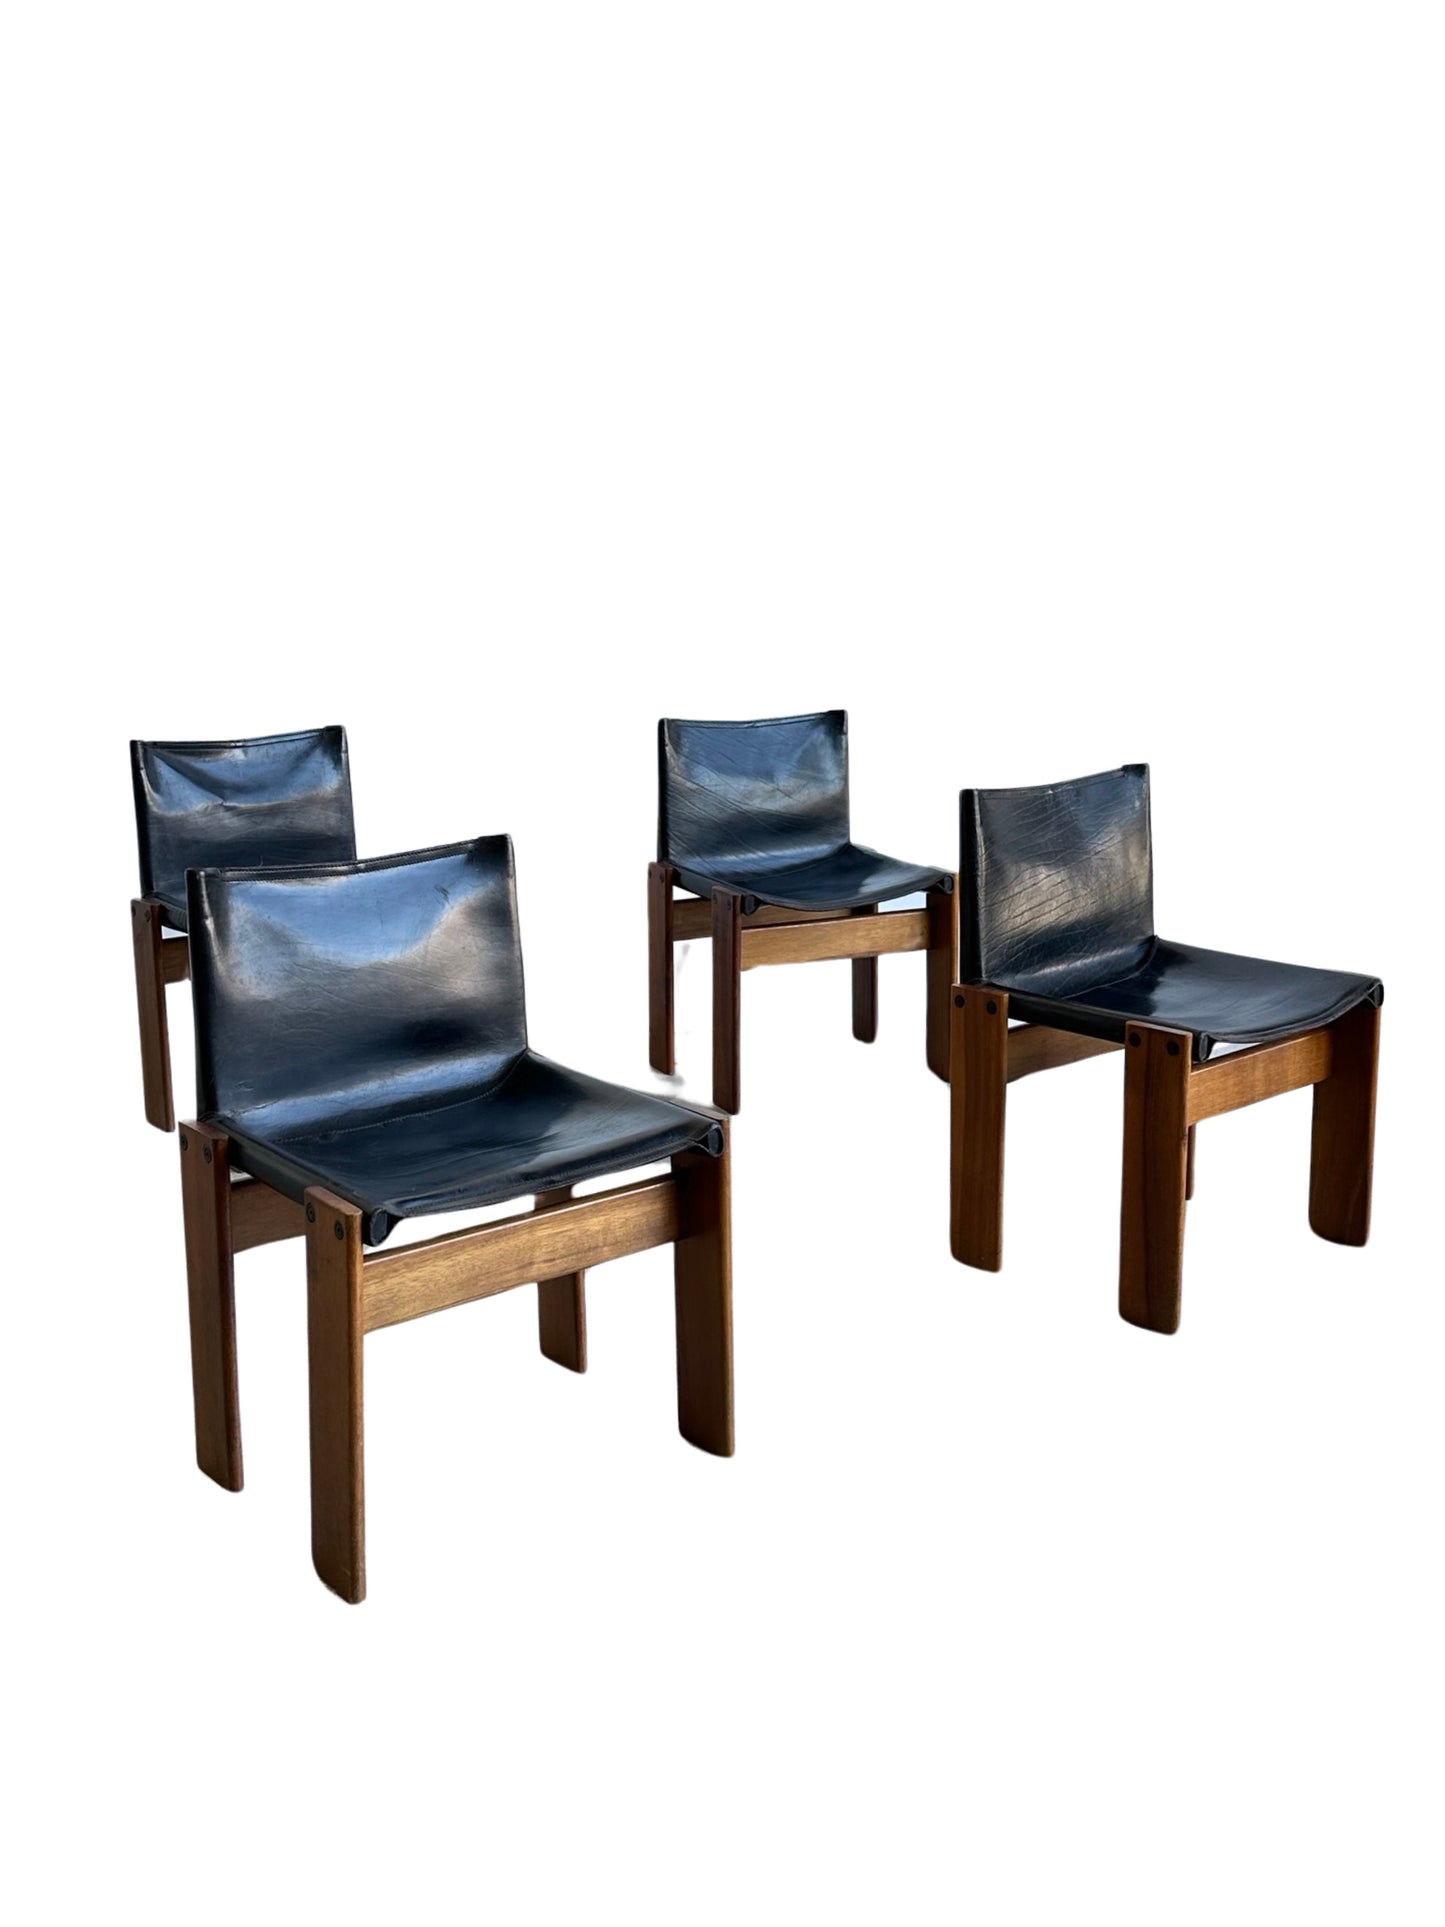 "Monk" Set of Four Black Leather & Walnut Timber Chairs by Afra and Tobia Scarpa for Molteni